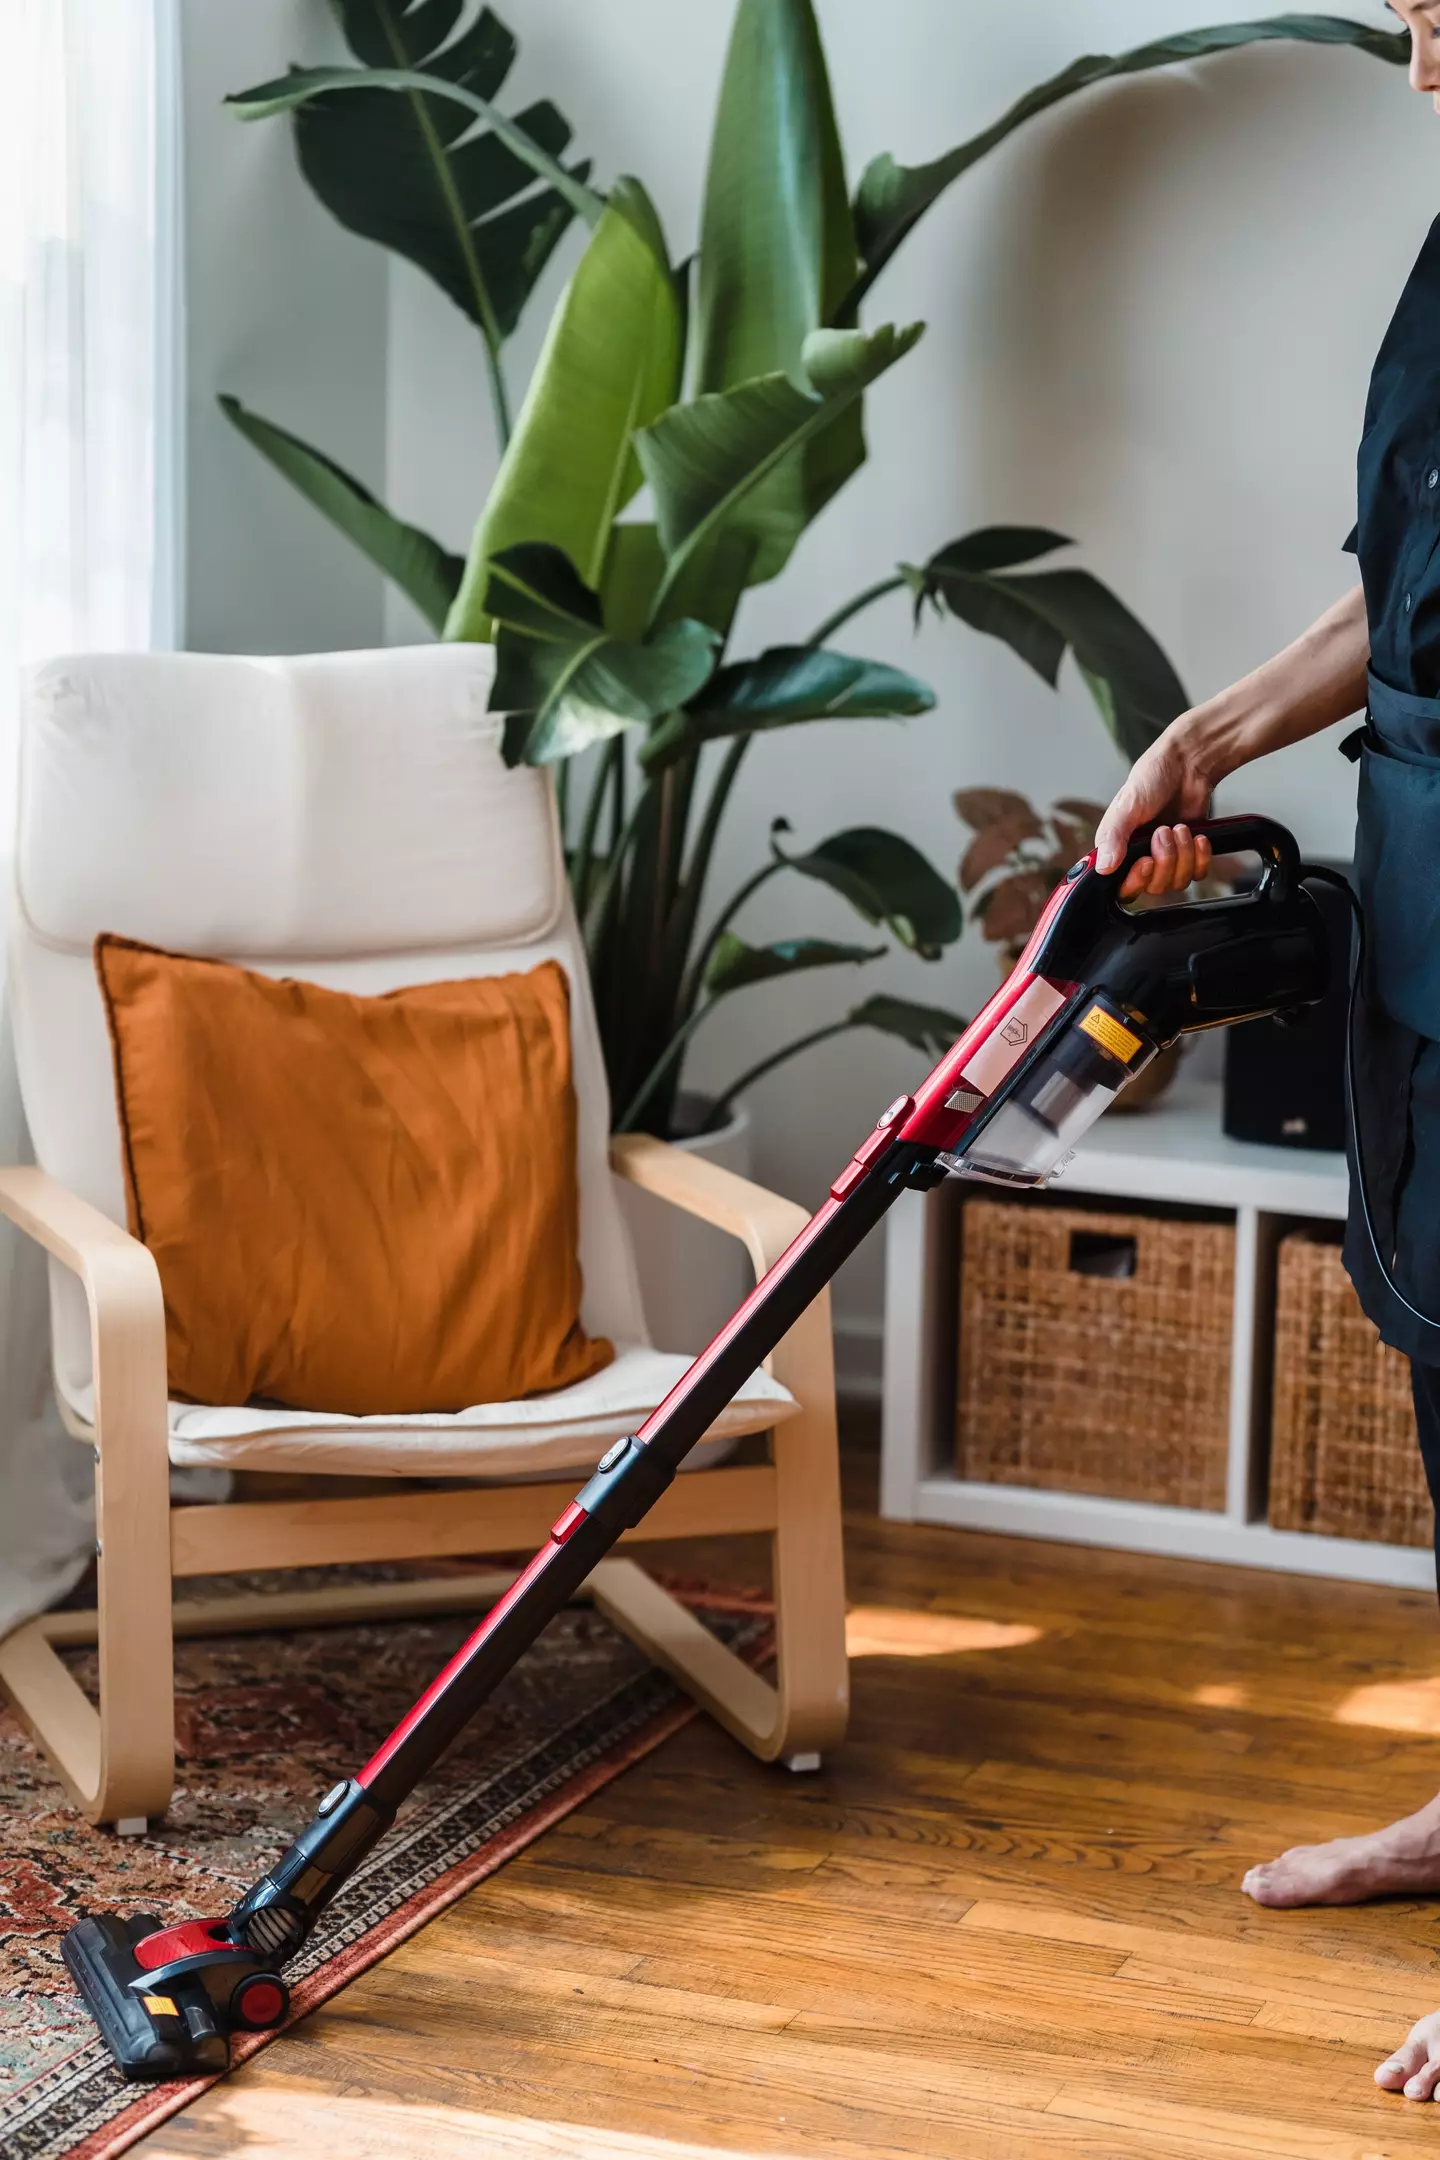 Do you use a cordless or corded hoover?